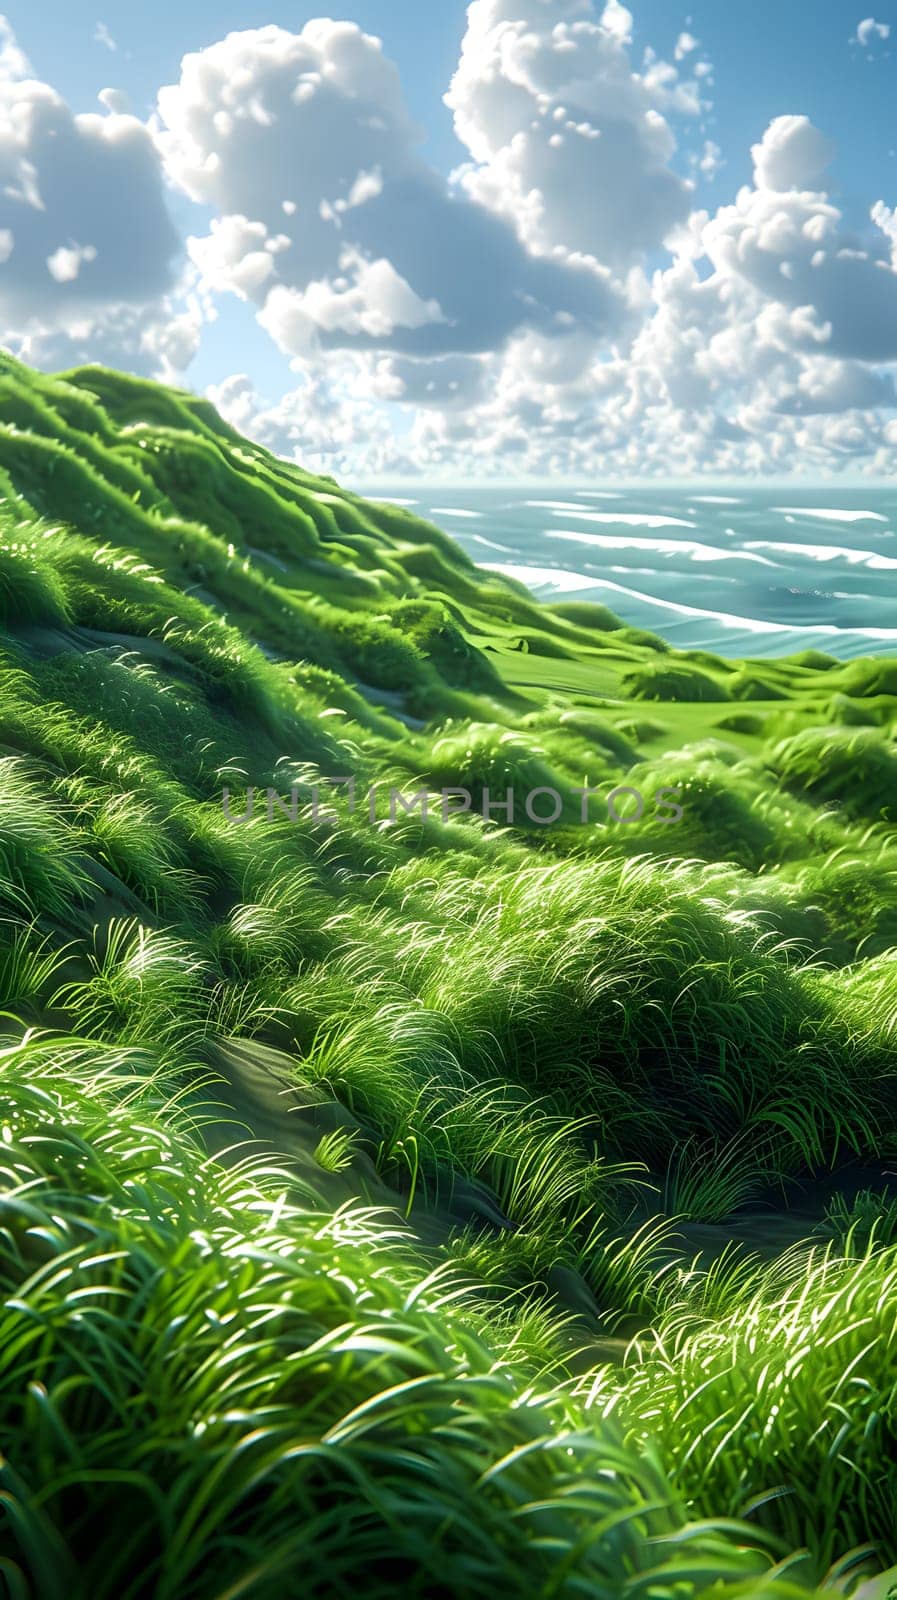 A stunning natural landscape of a lush green hillside with terrestrial plants and grass, overlooking the ocean under a clear sky with fluffy clouds in the background